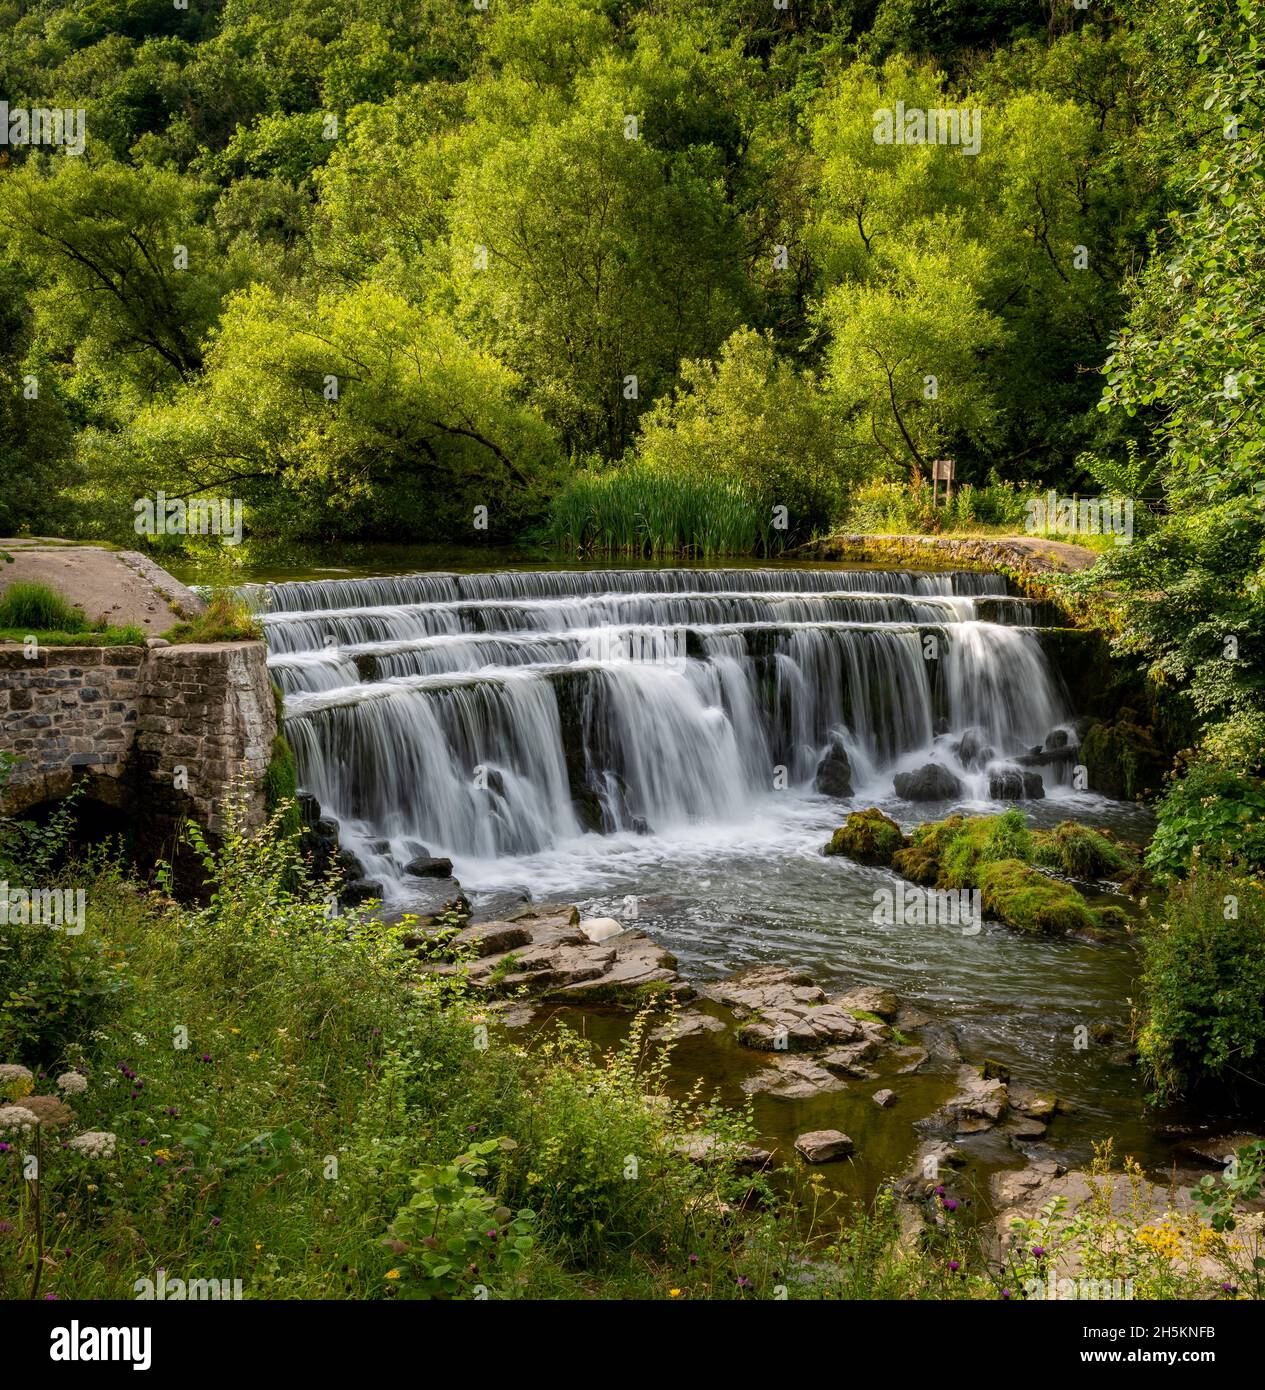 Monsal Weir, Monsal Dale, Derbyshire, Angleterre, Royaume-Uni Banque D'Images